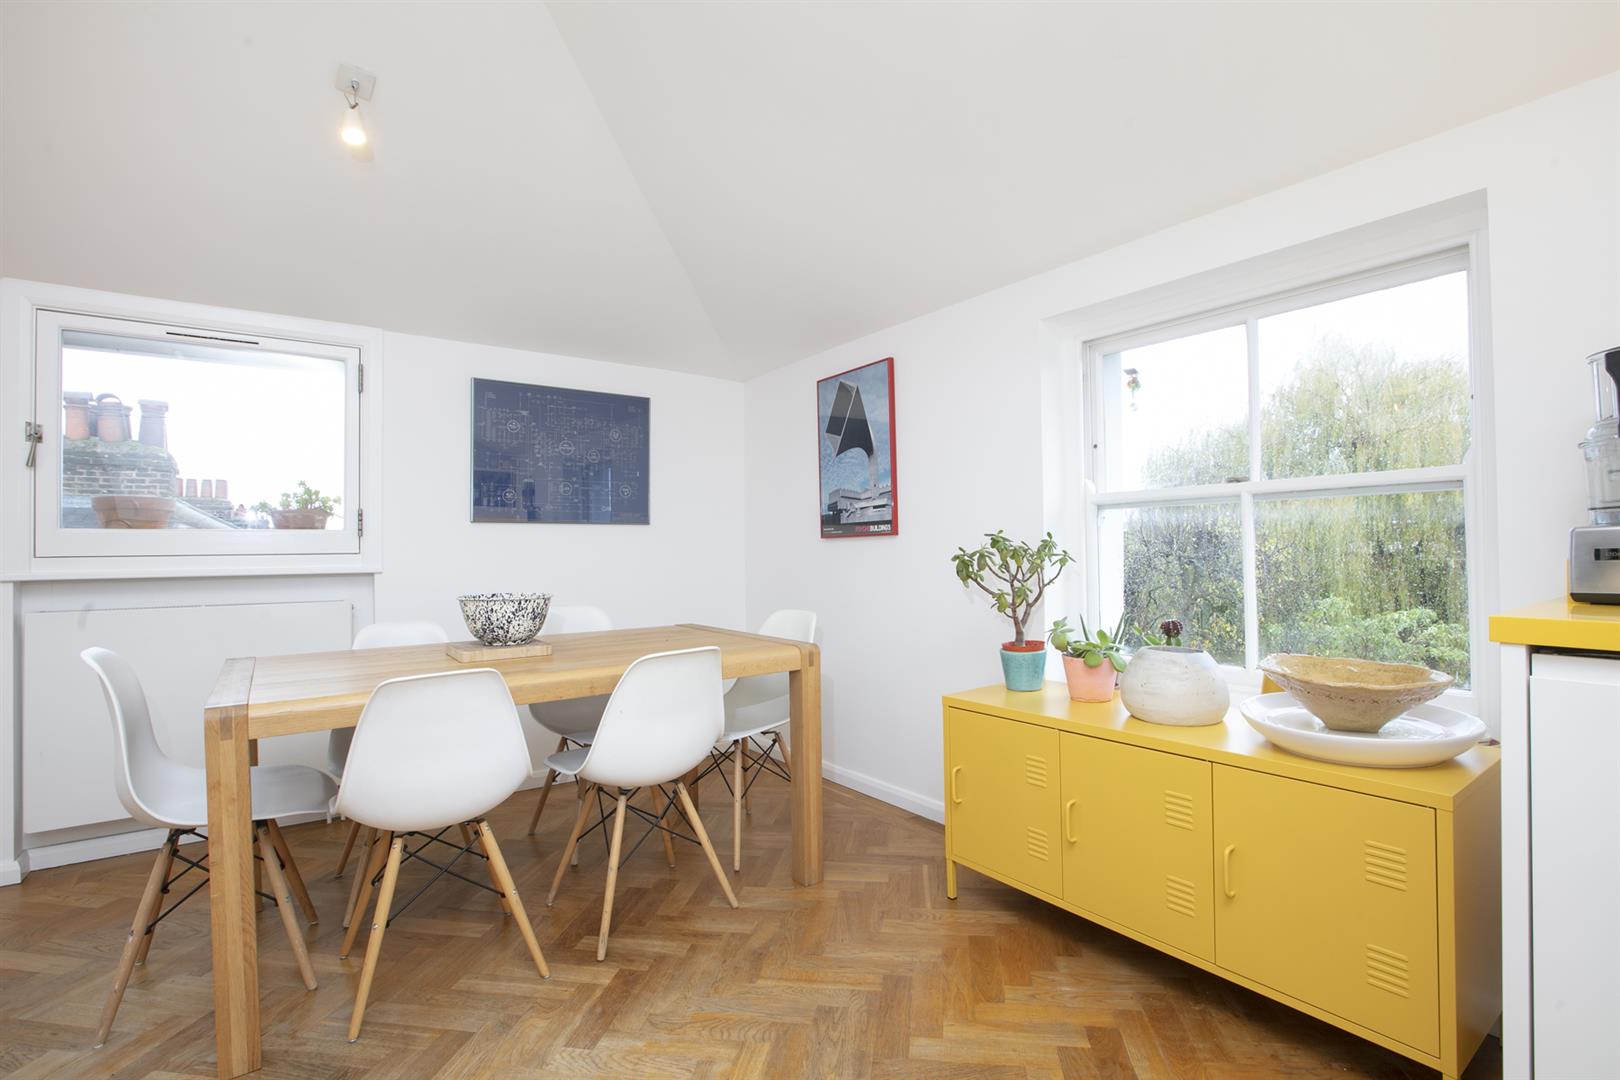 Flat - Conversion Under Offer in Holly Grove, Peckham, SE15 893 view22